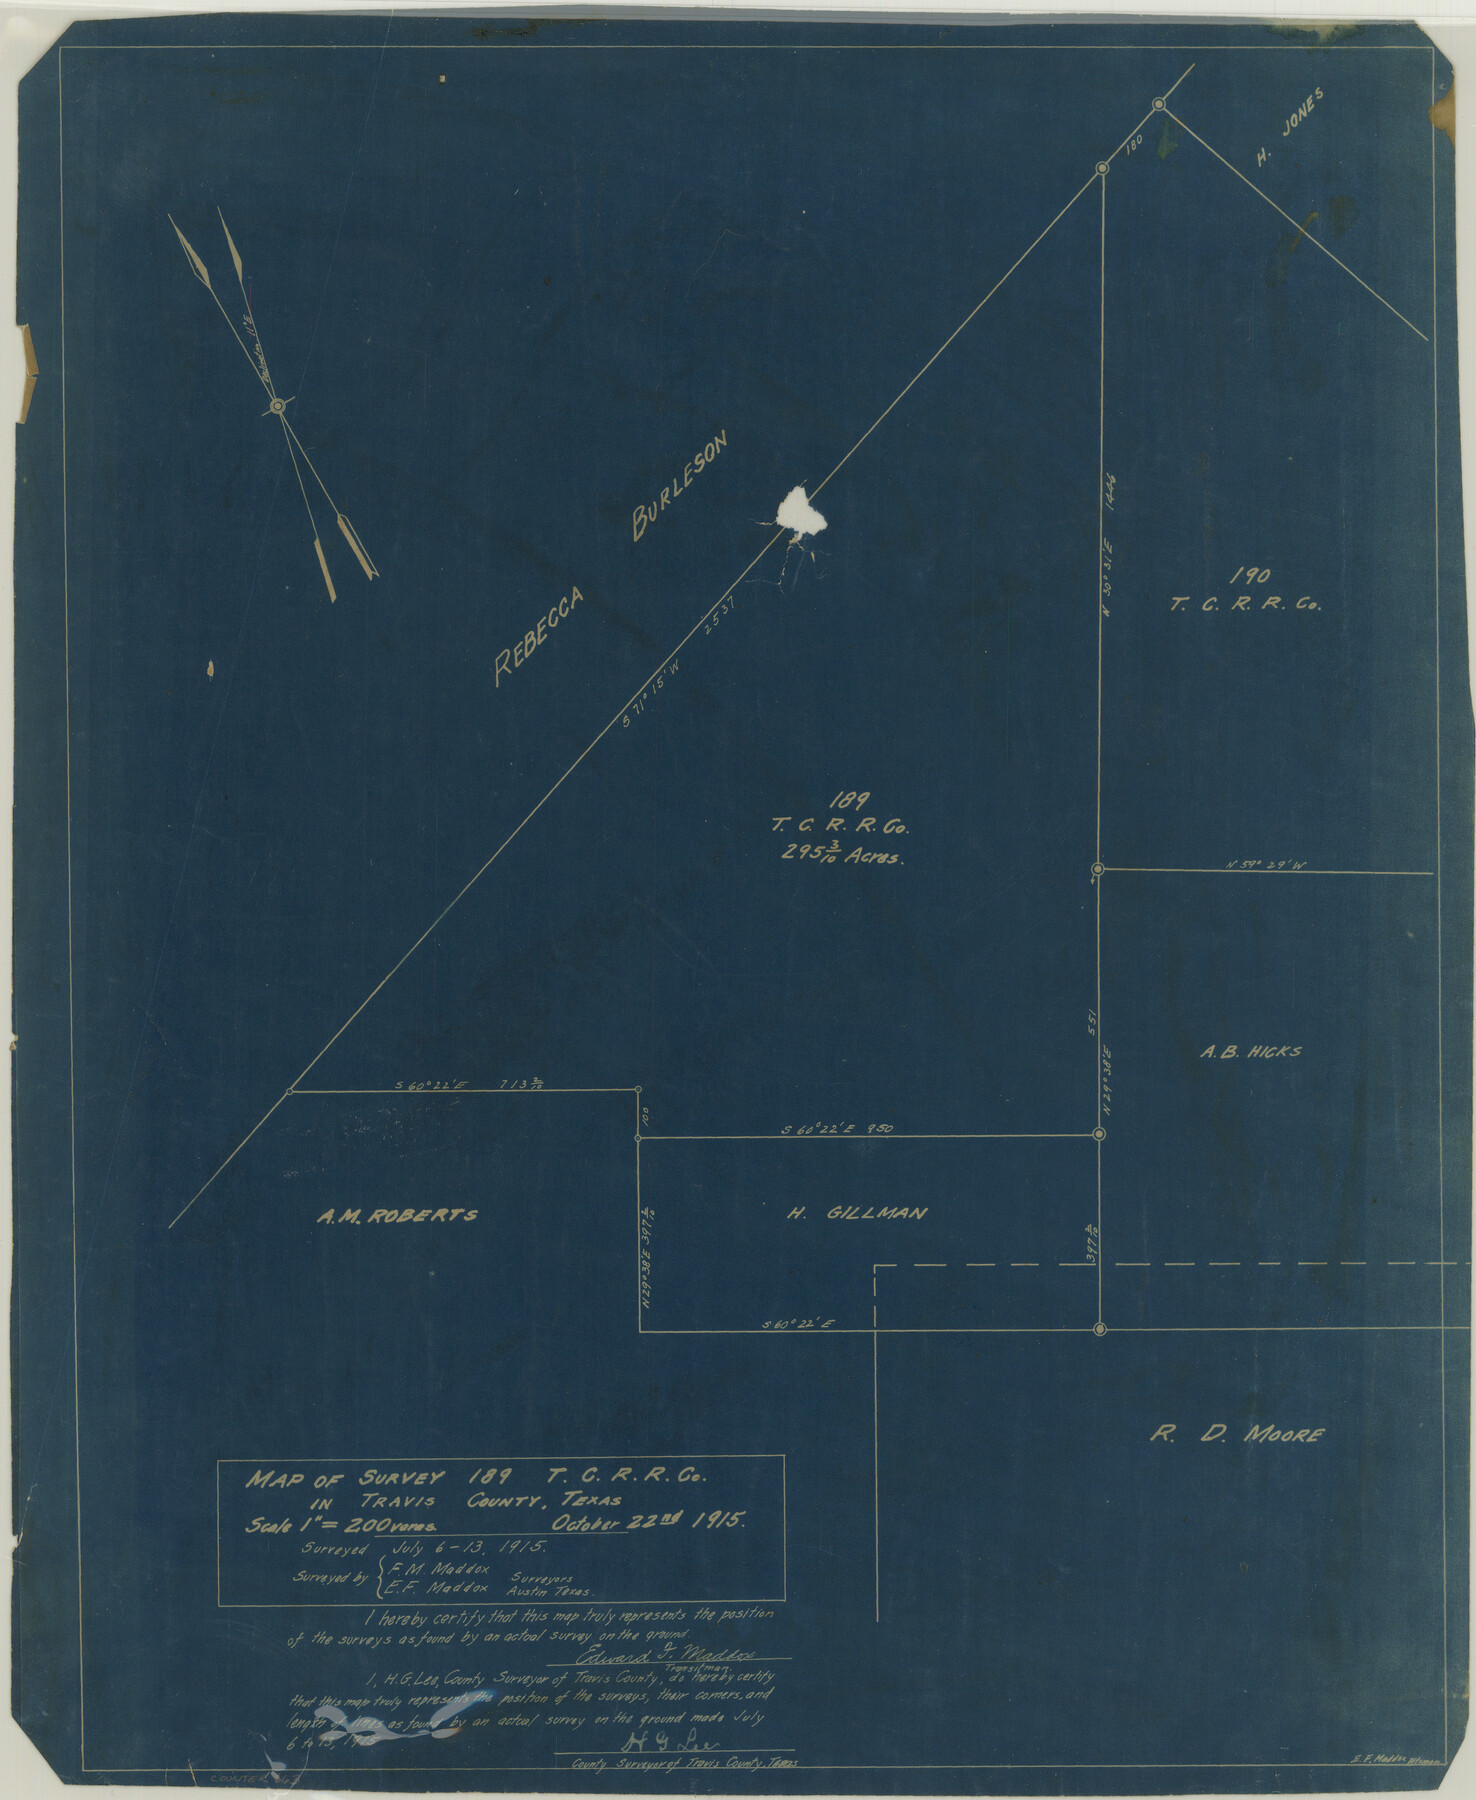 663, Map of survey 189, T. C. R.R. Co. in Travis County, Texas, Maddox Collection